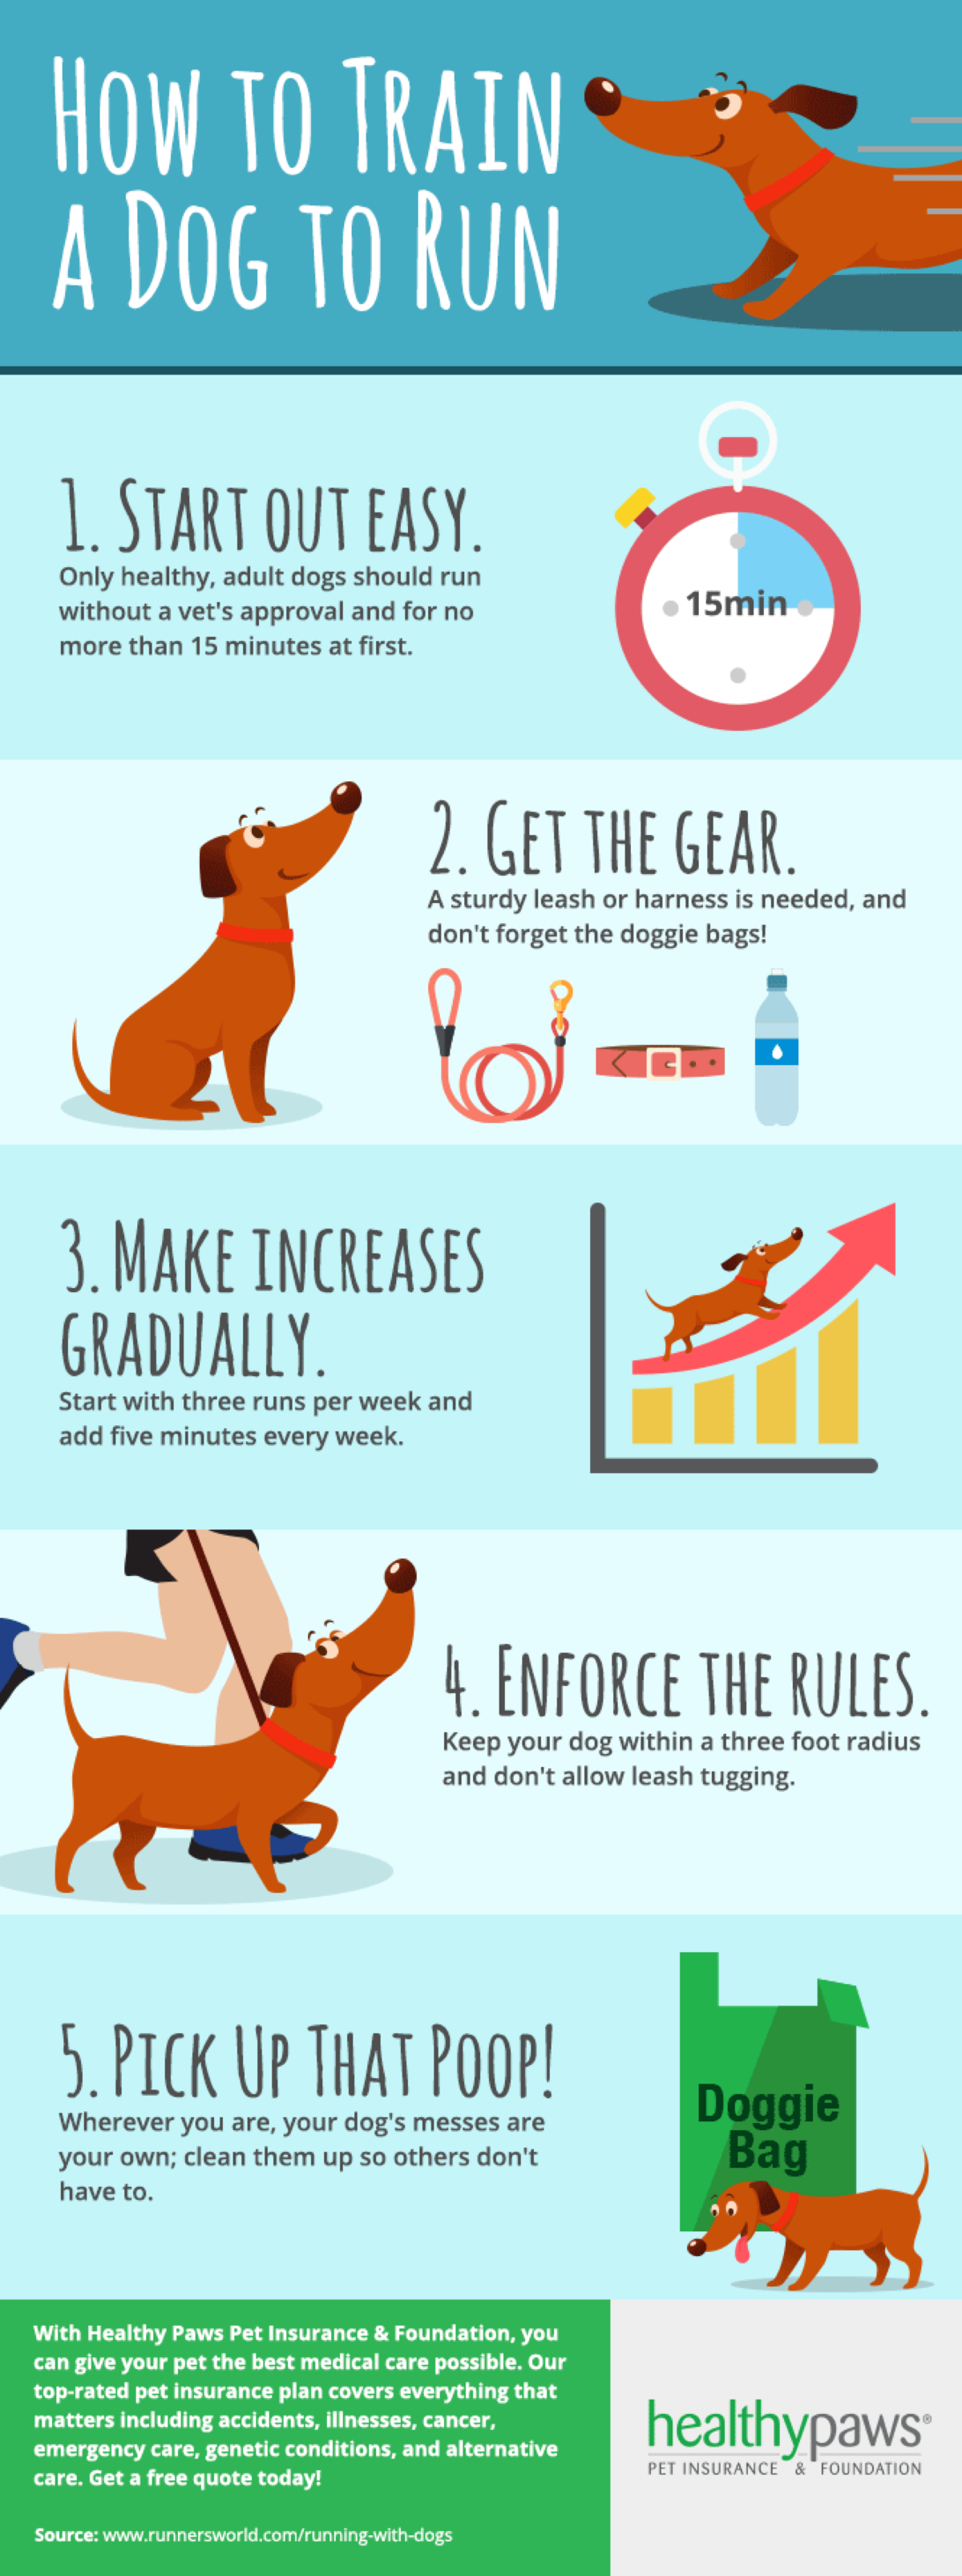 dog_running_infographic_600_1606.png